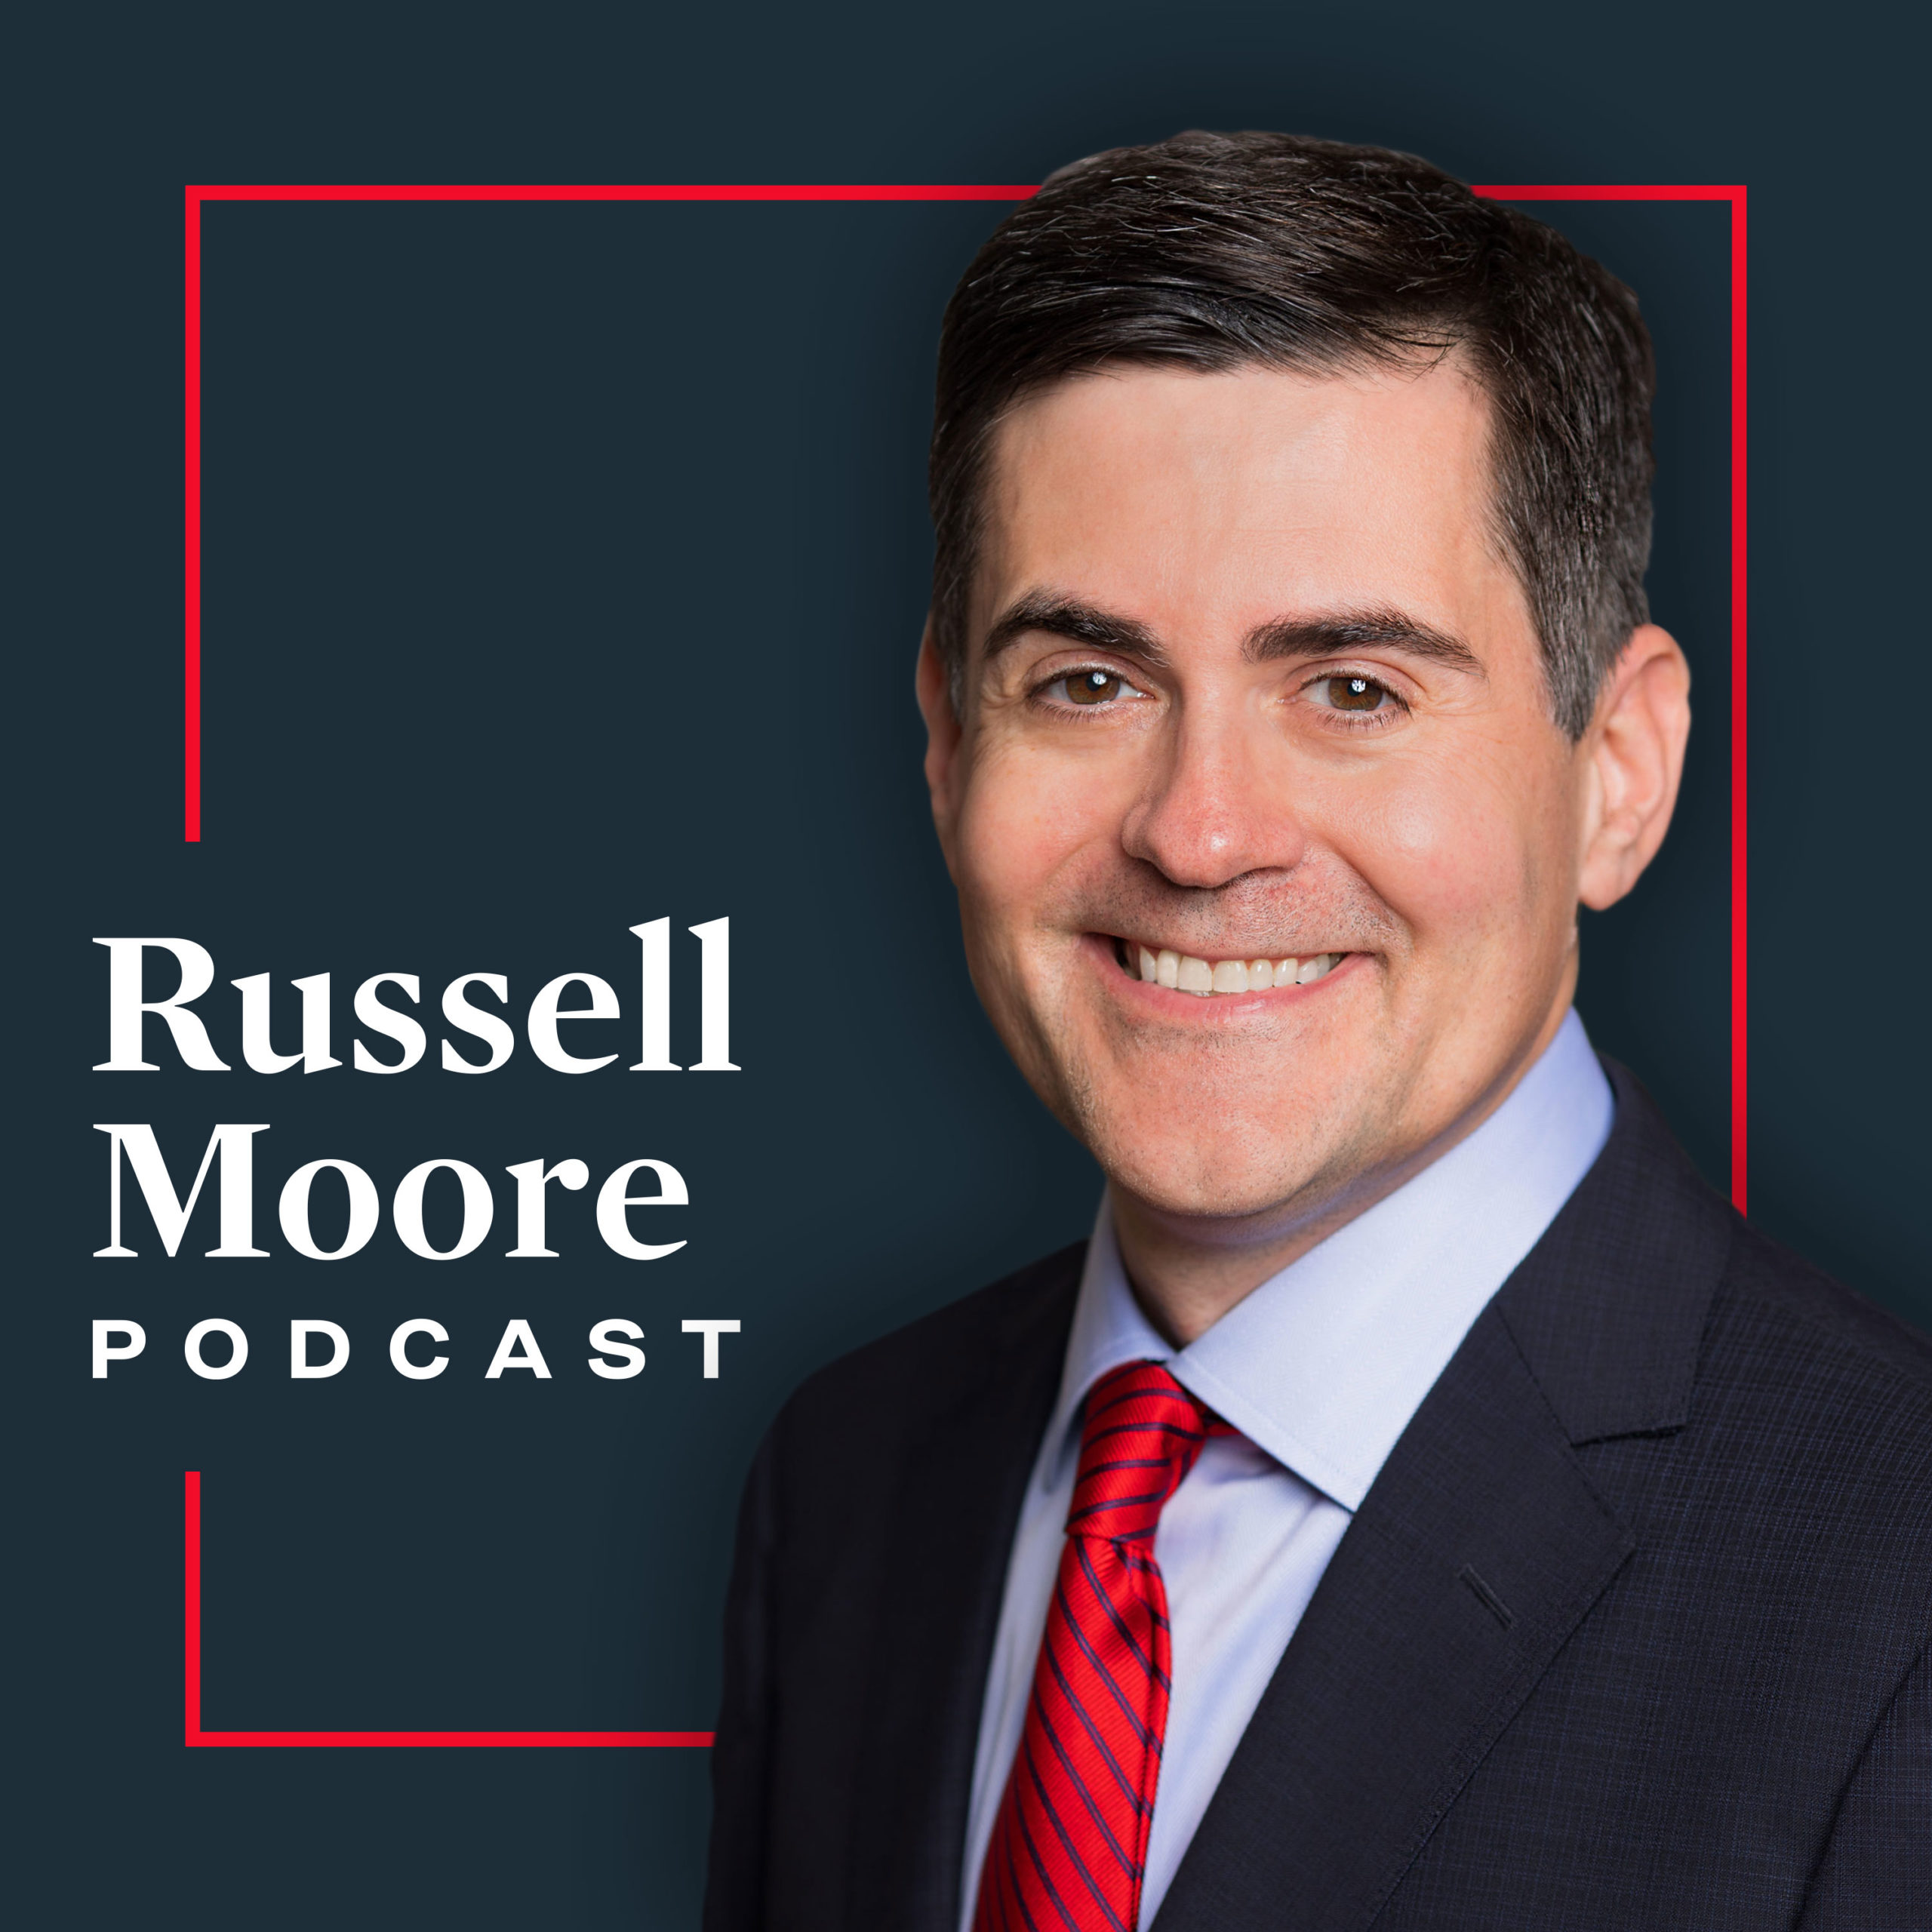 Announcing My New Podcast - Russell Moore